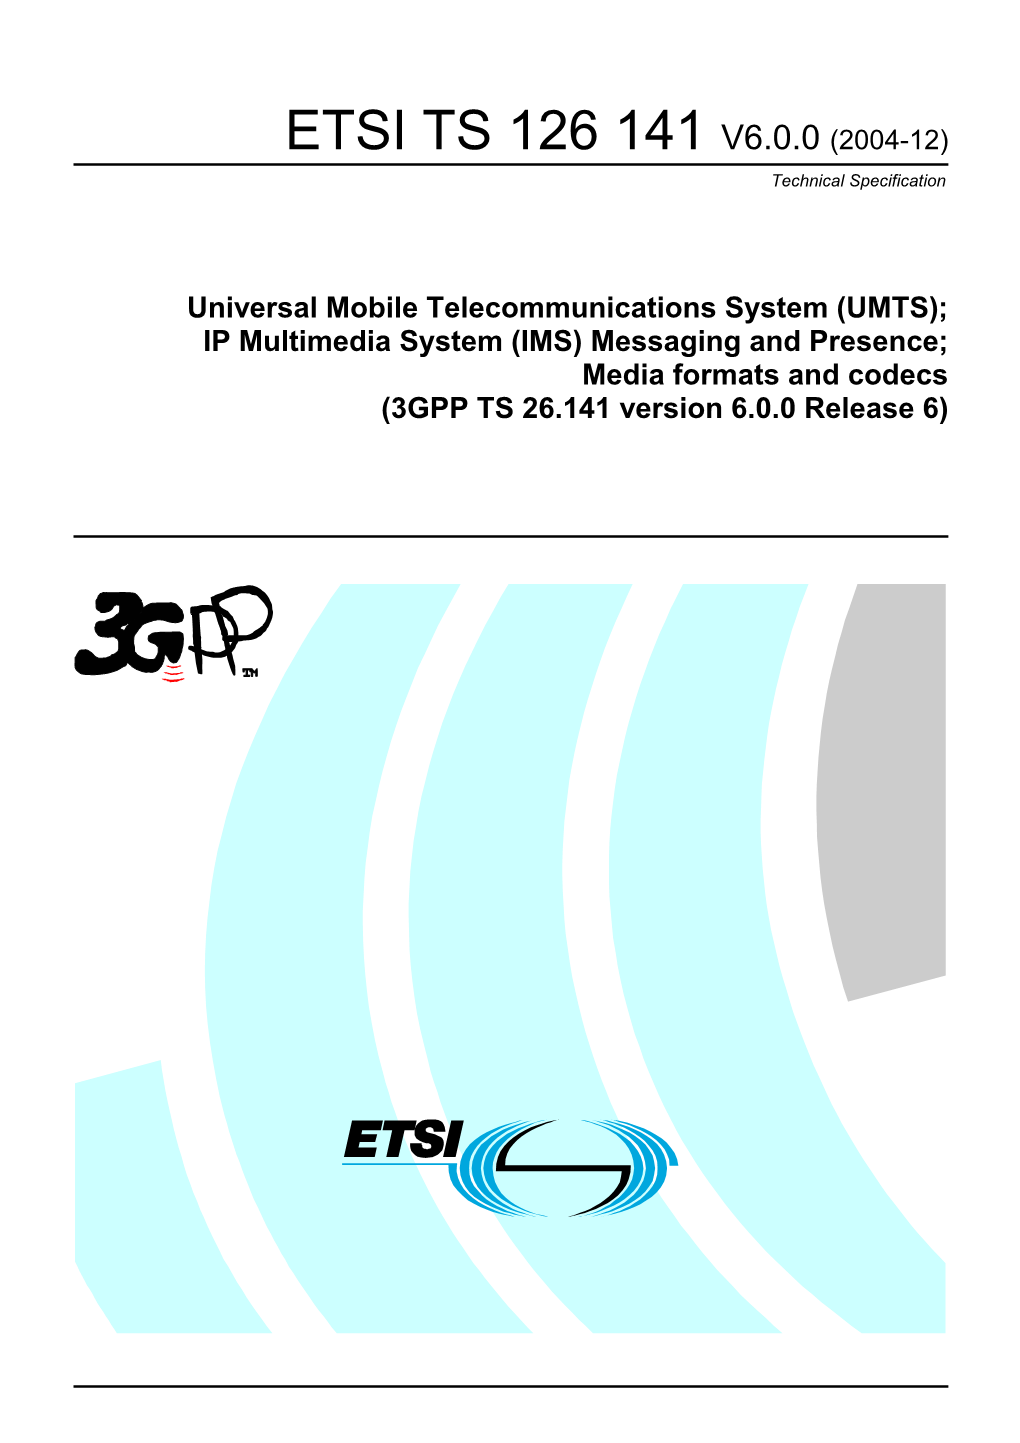 UMTS); IP Multimedia System (IMS) Messaging and Presence; Media Formats and Codecs (3GPP TS 26.141 Version 6.0.0 Release 6)